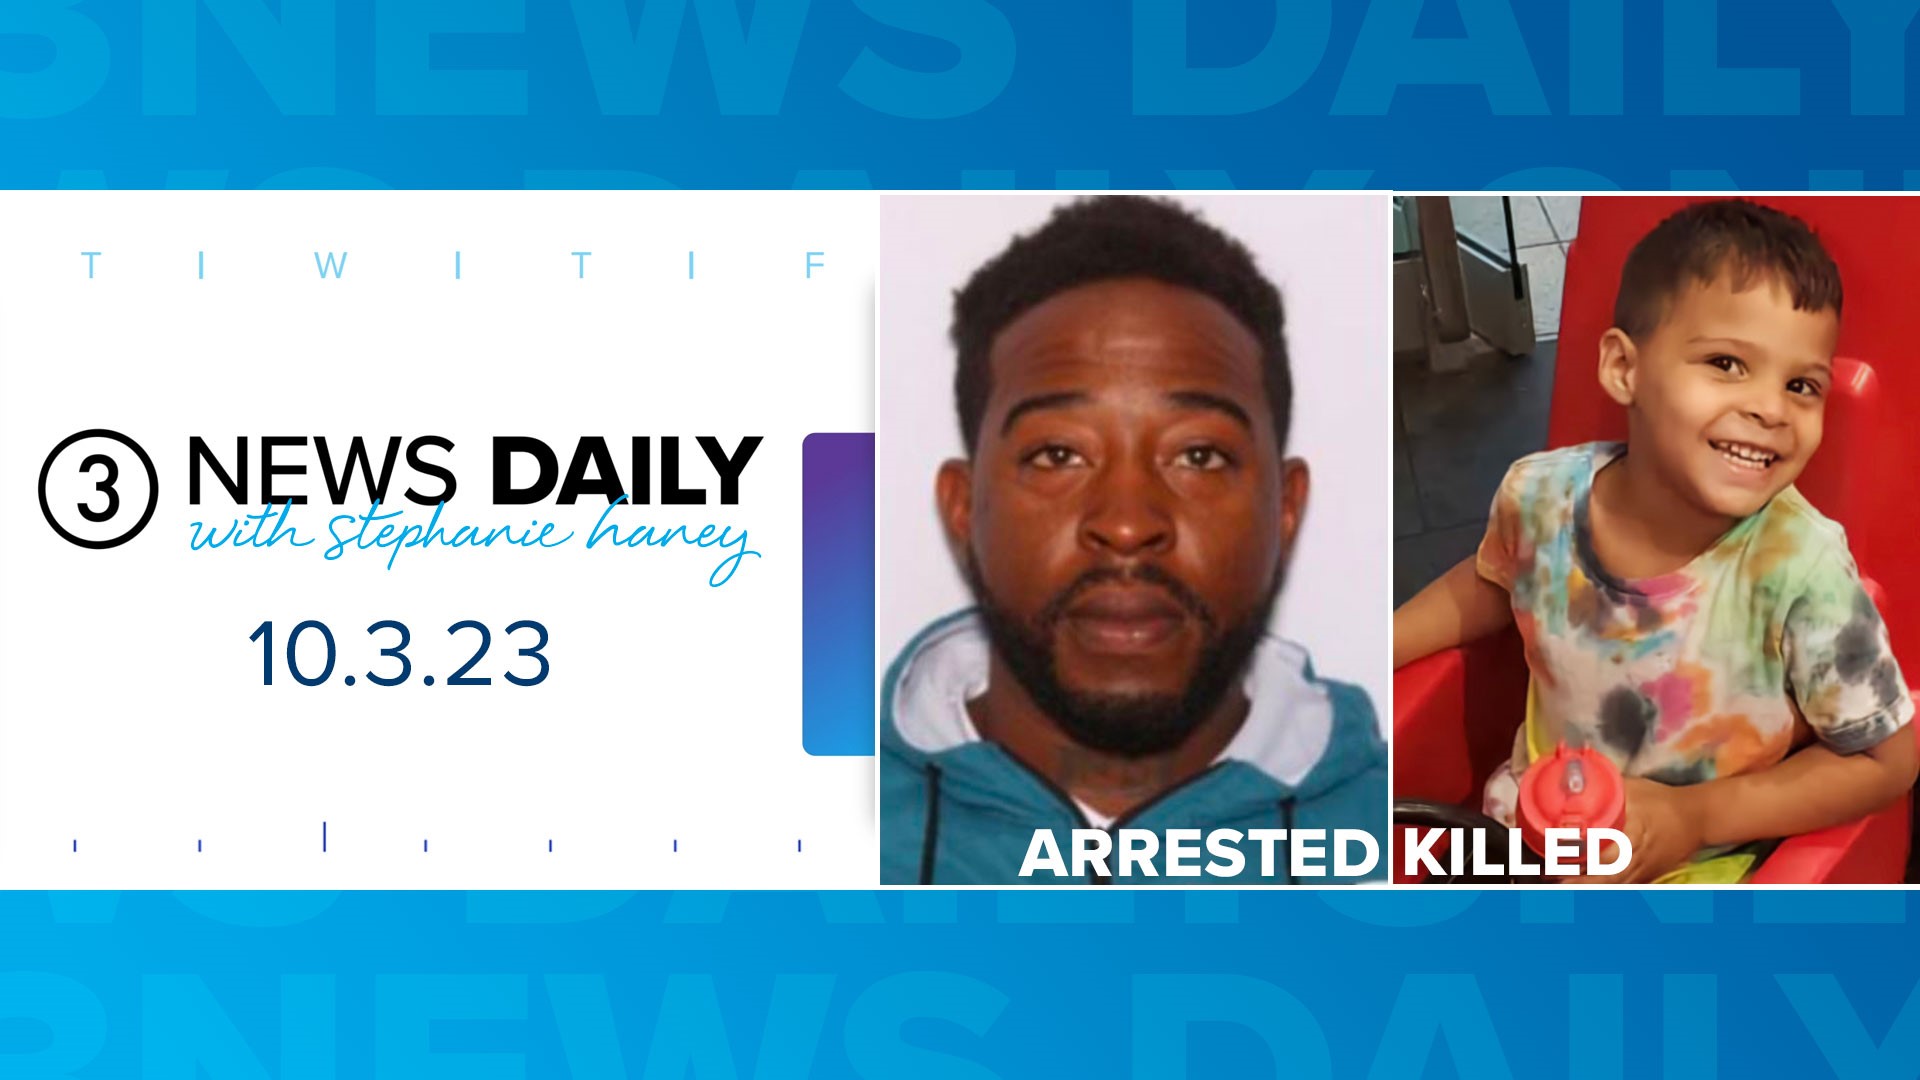 4th arrest for shooting death of 3-year-old Cleveland boy Luis Diaz; wife killed in motorcycle crash, and more on News Daily with Stephanie Haney